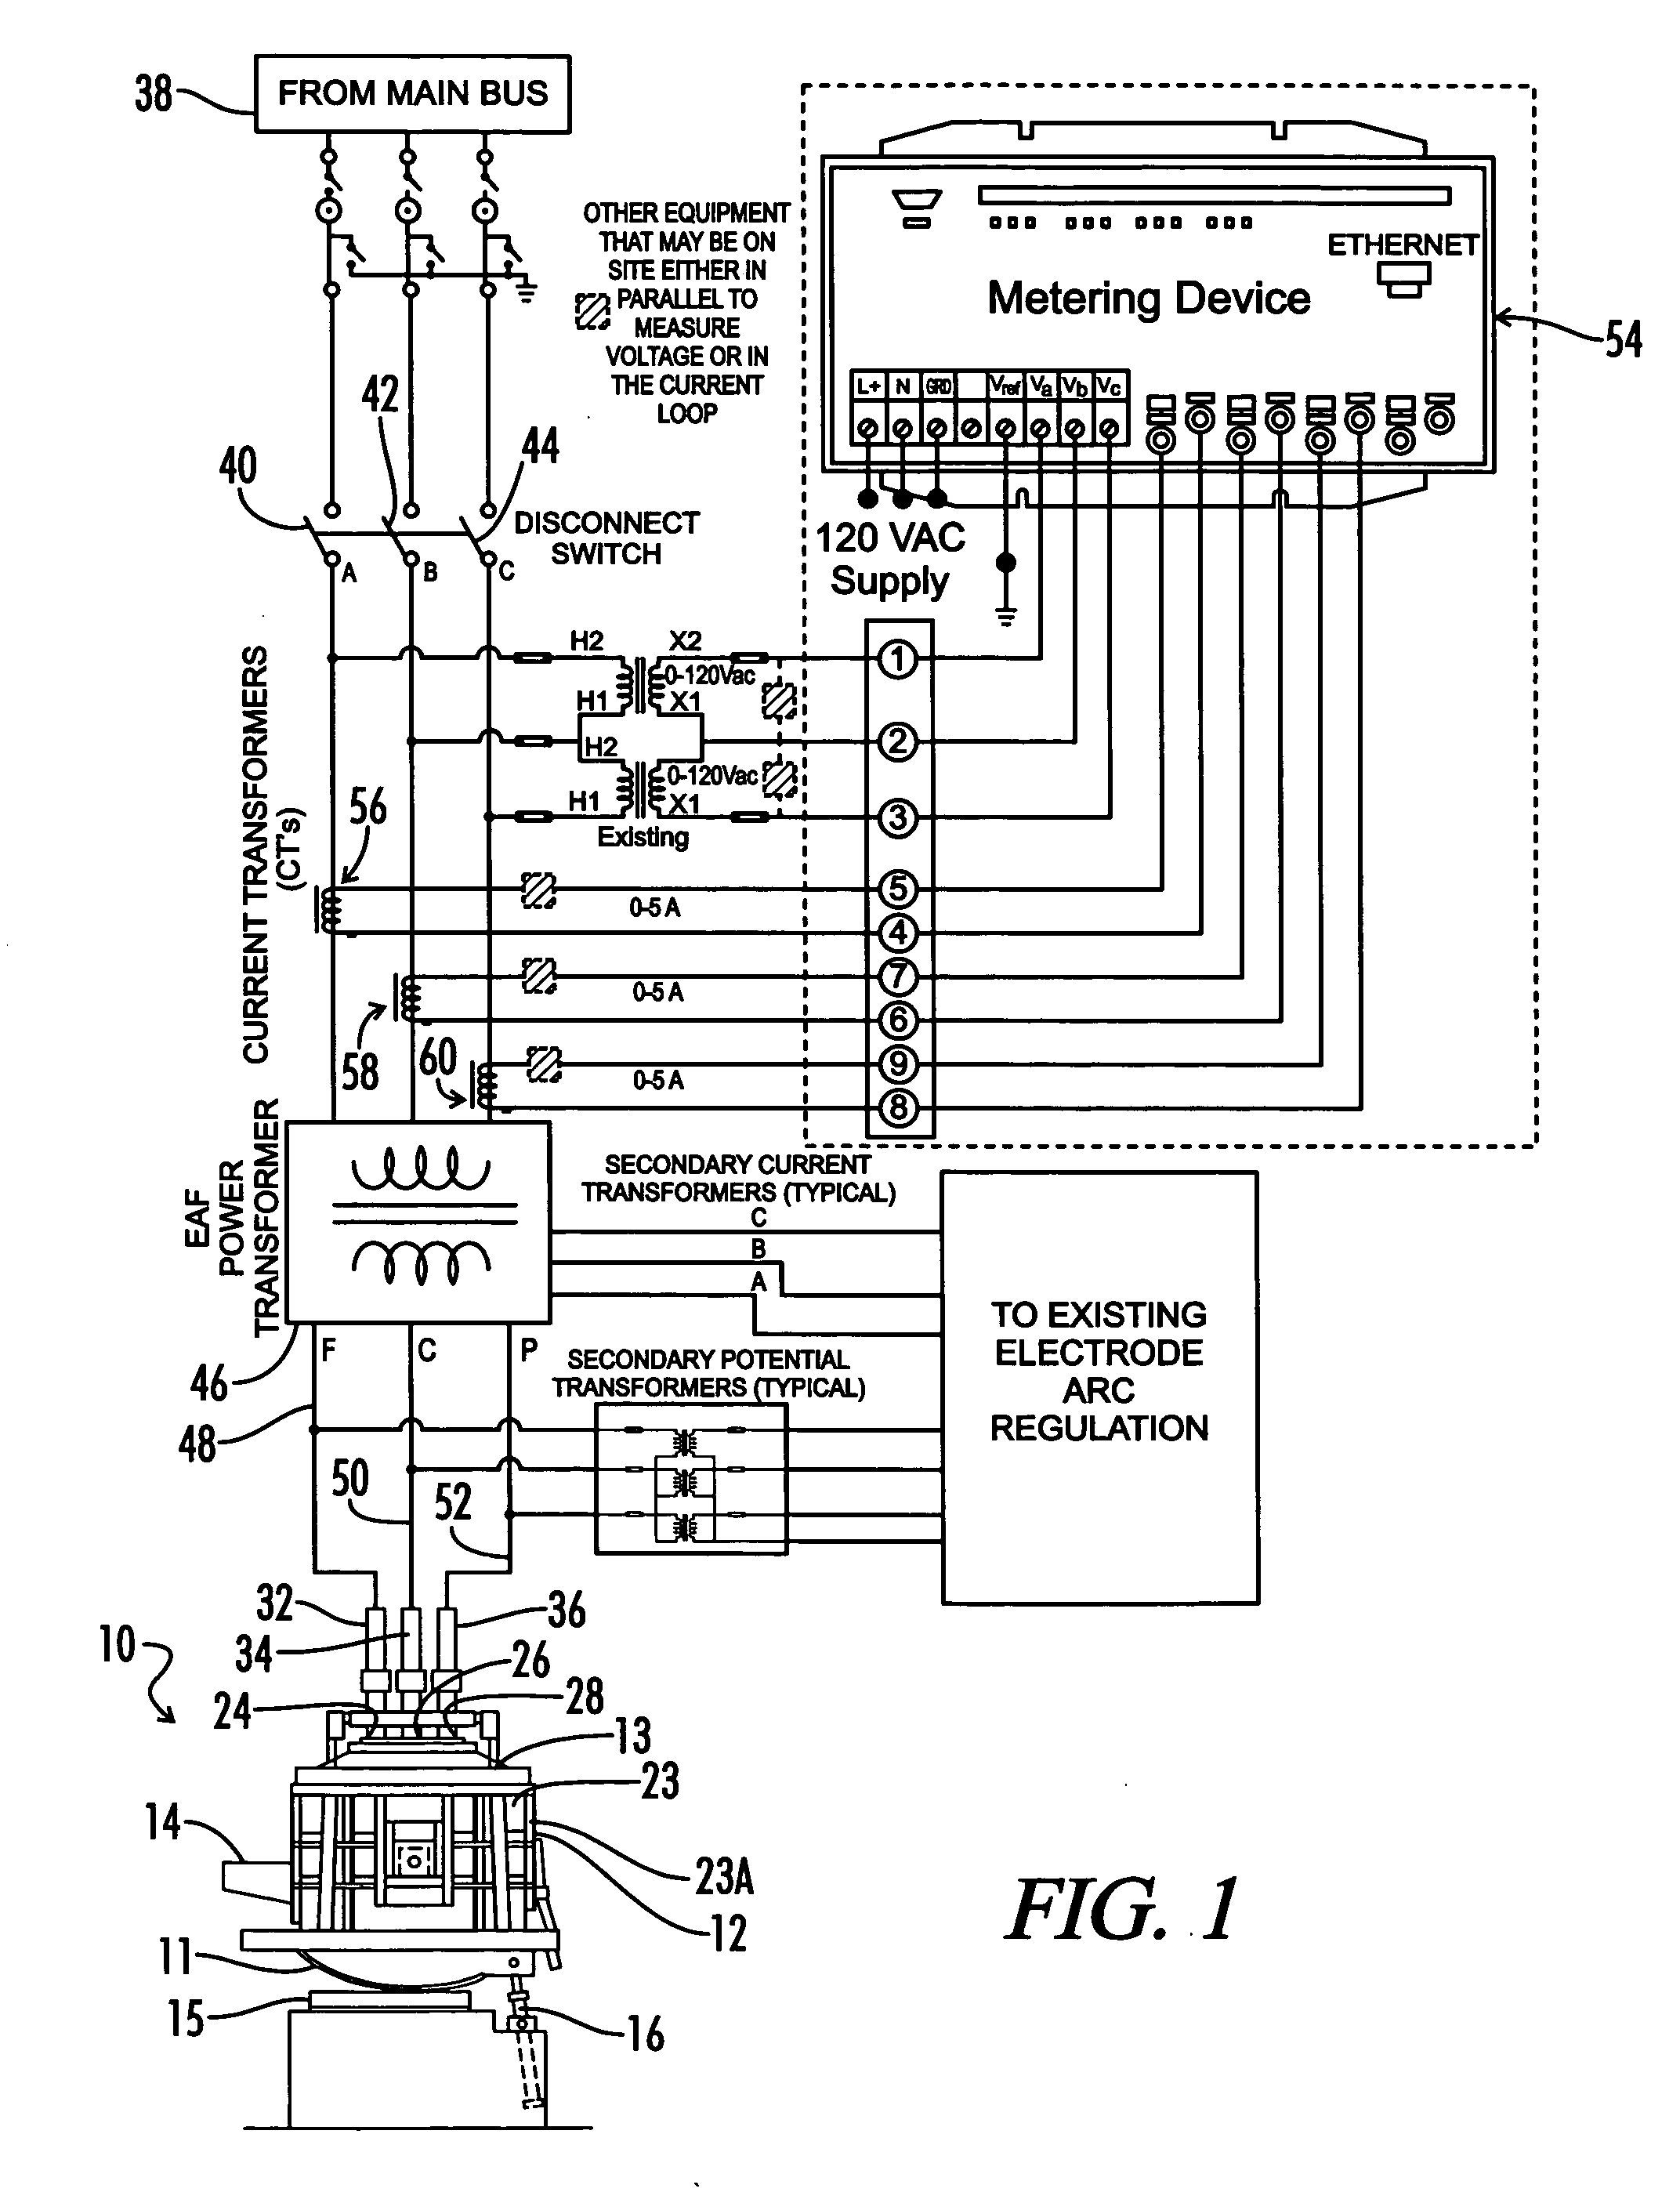 Method for controlling foaming of slag in an electric arc furnace